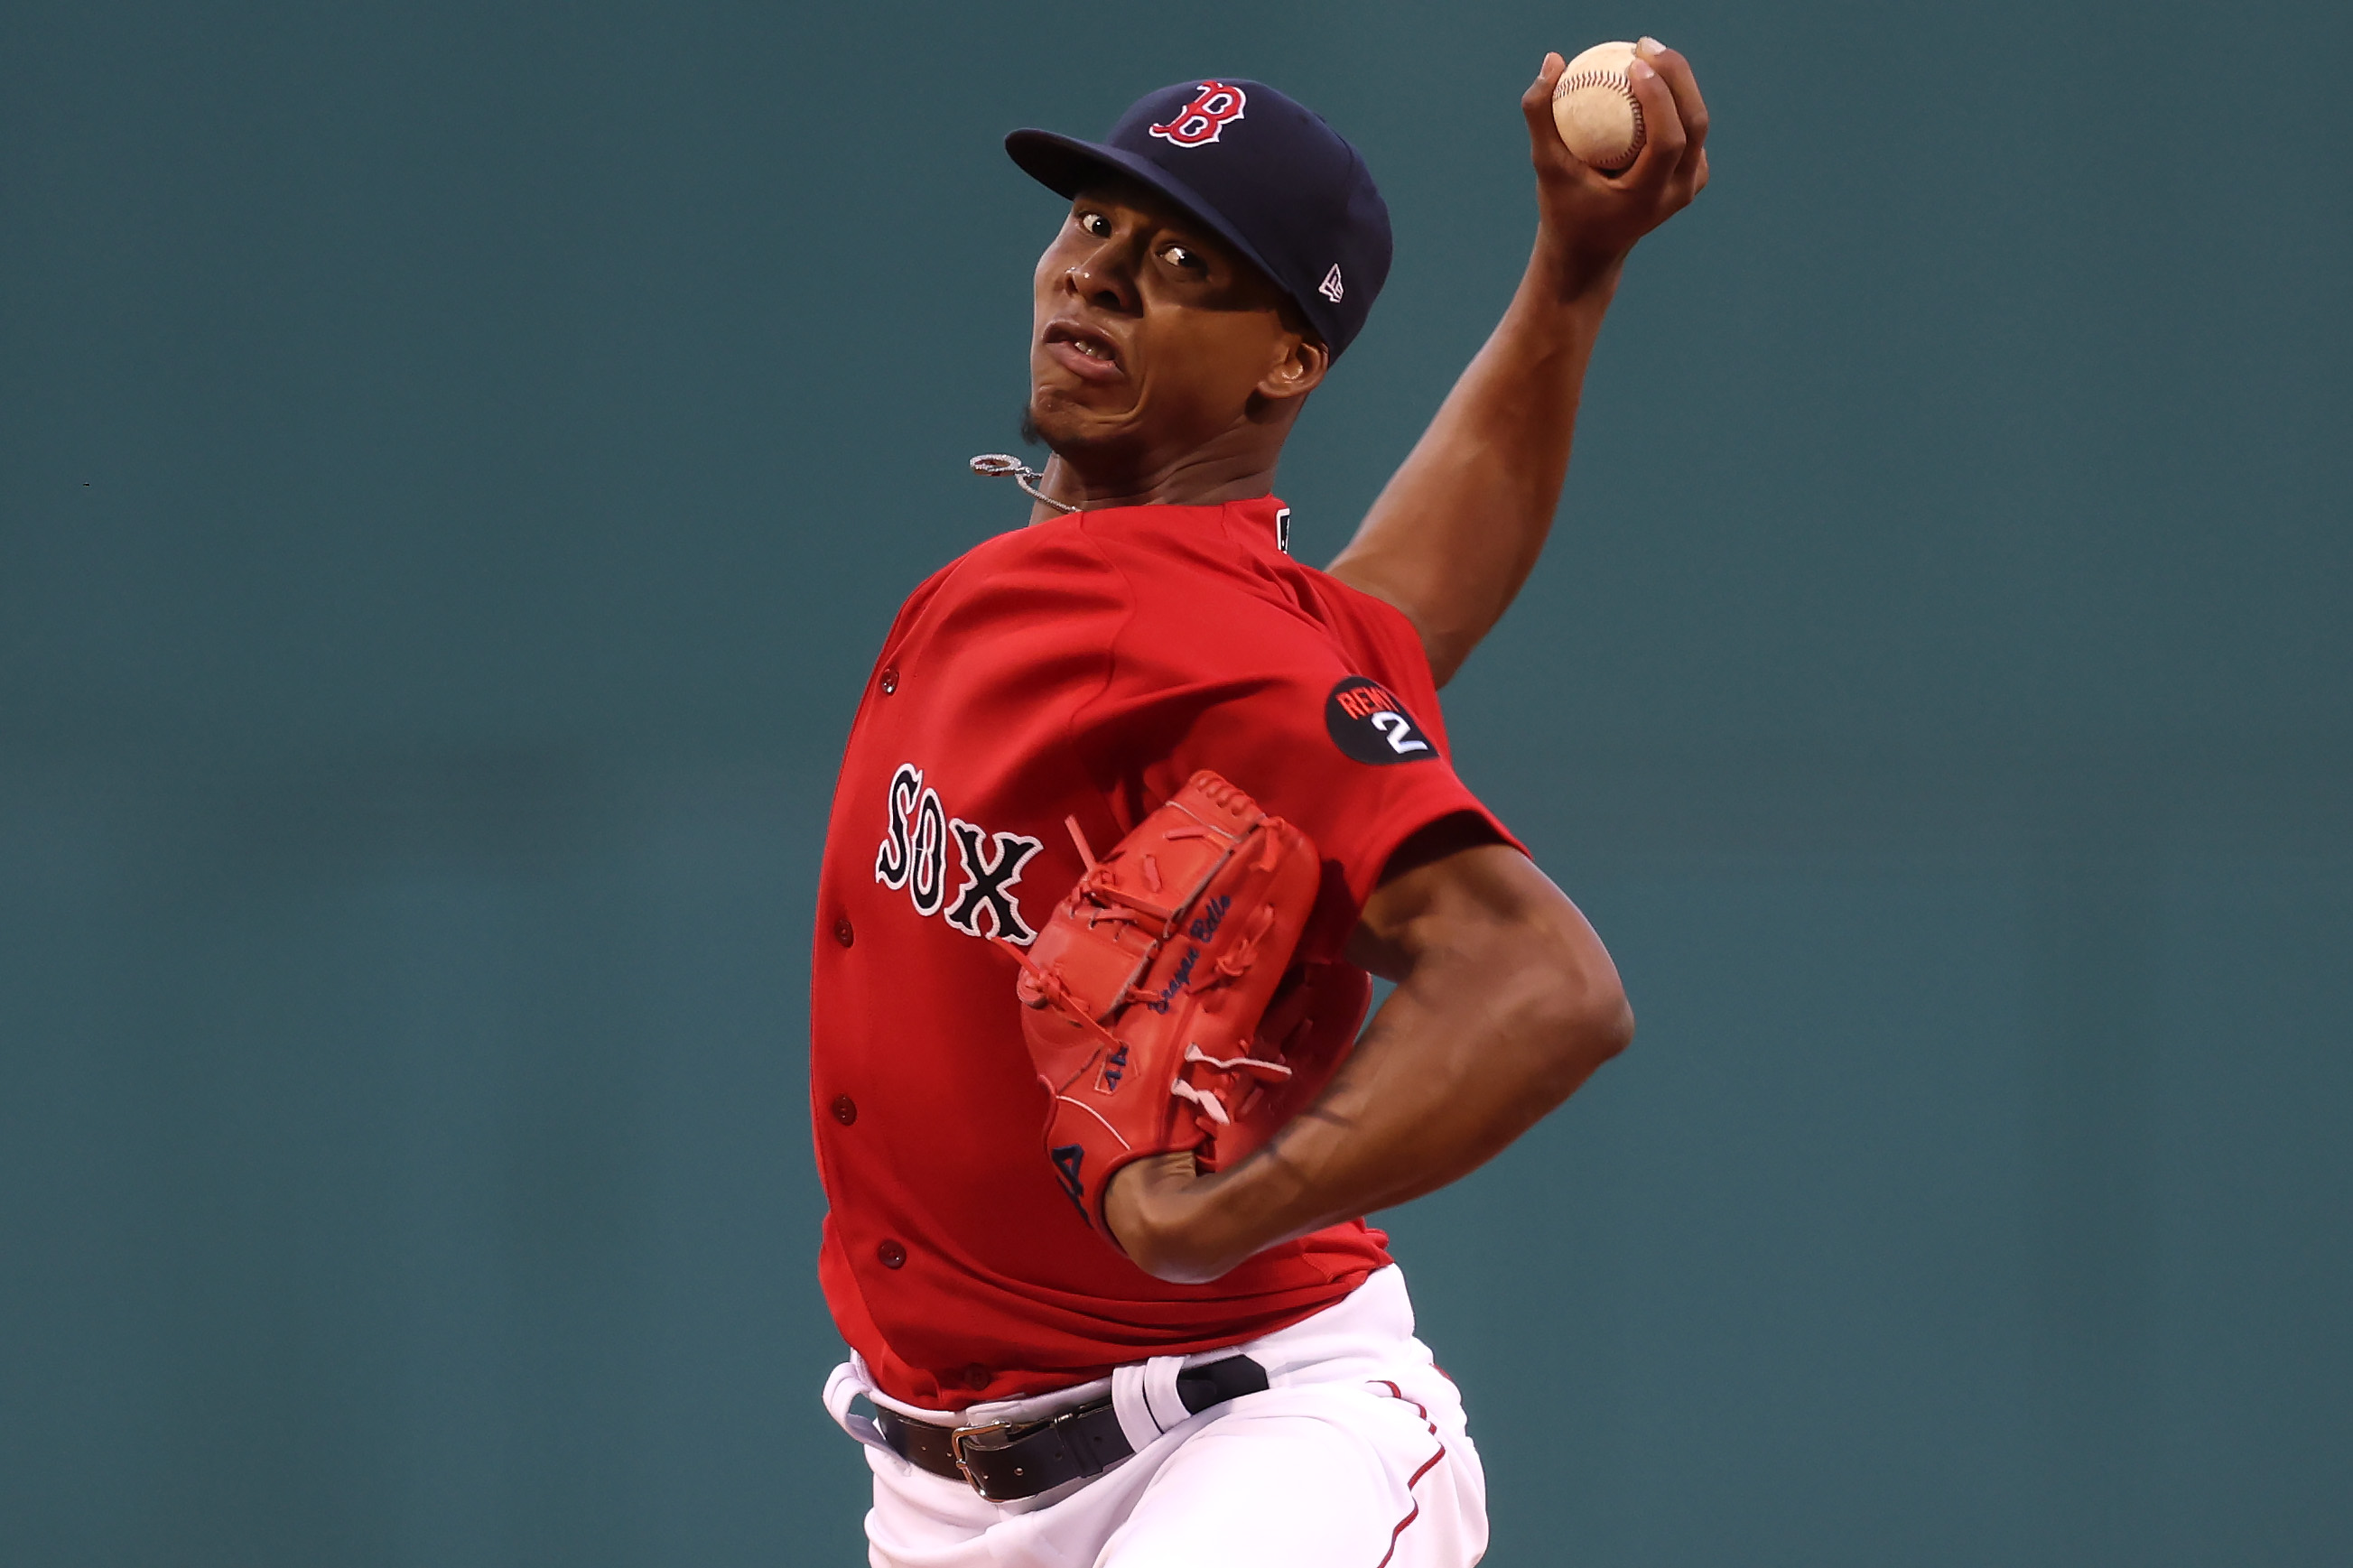 Red Sox well represented on MLB.com's Top 100 players ranking for 2022  season – NBC Sports Boston